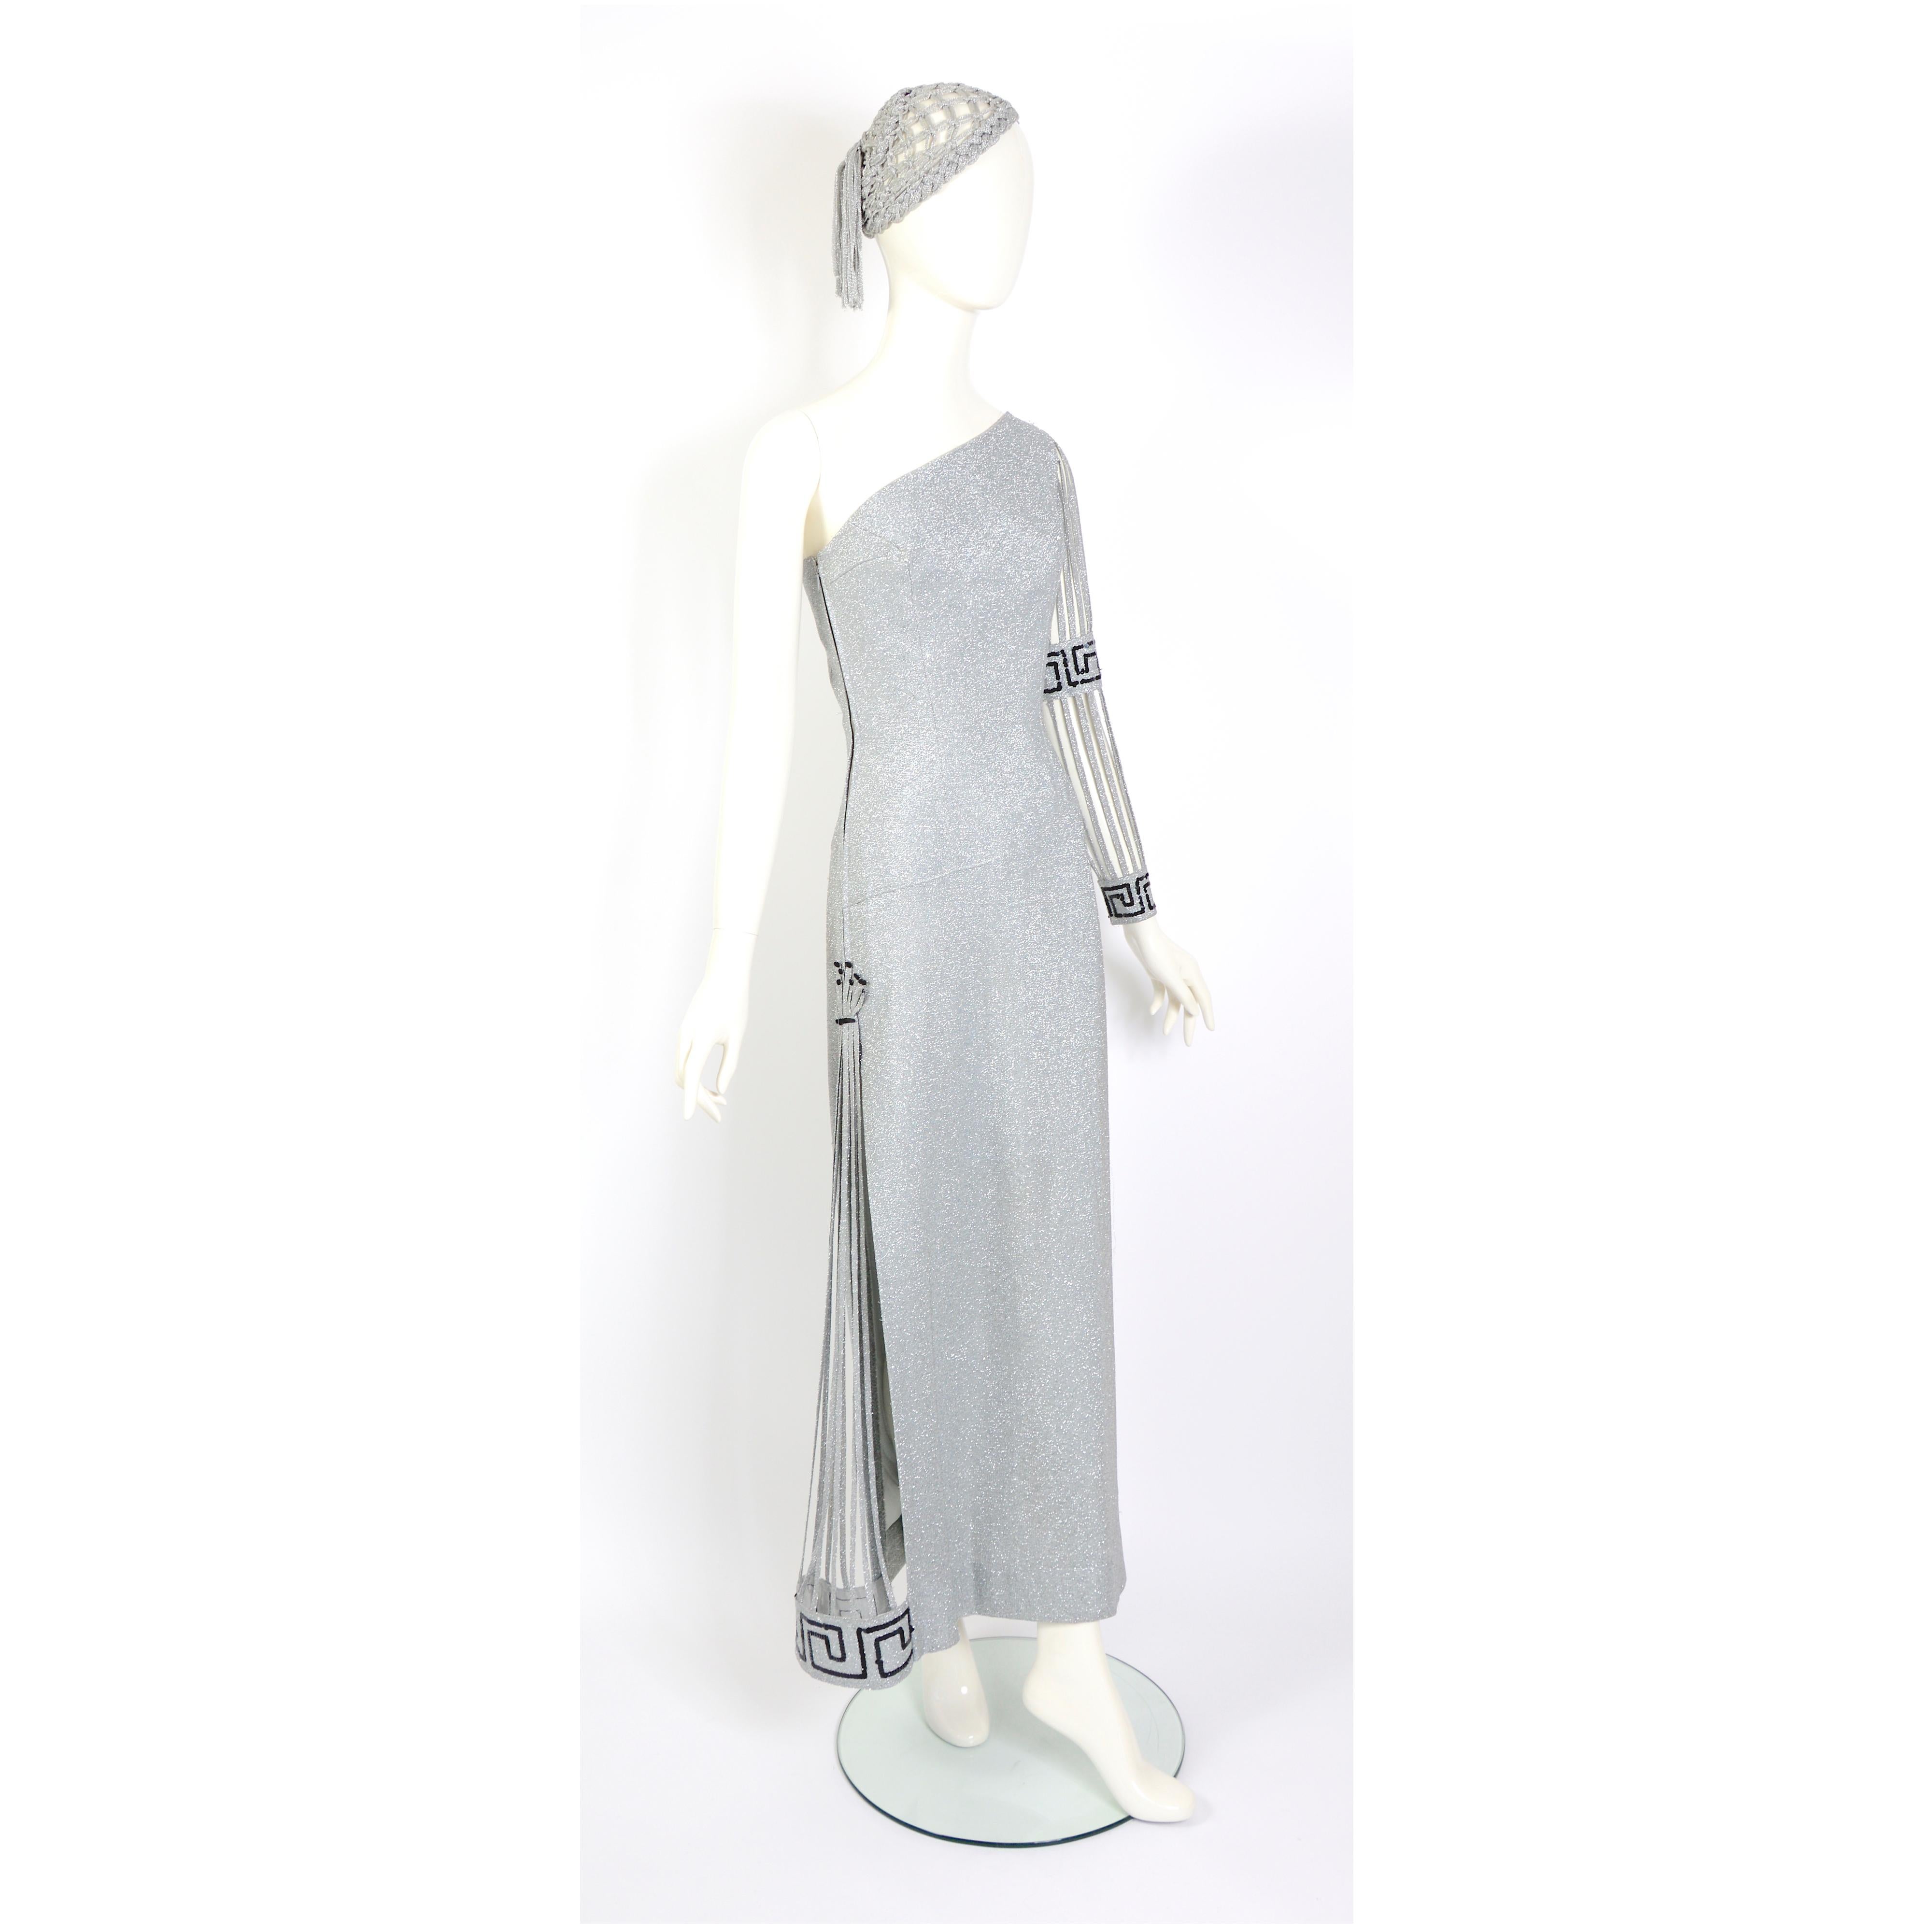 This could be the fun party dress you were looking for.
Gorgeous embellished silver lurex with black paillette one-sleeve and split-side party dress in the style of Pierre Cardin. We've been told that the dress is Pierre Cardin, but we can't confirm